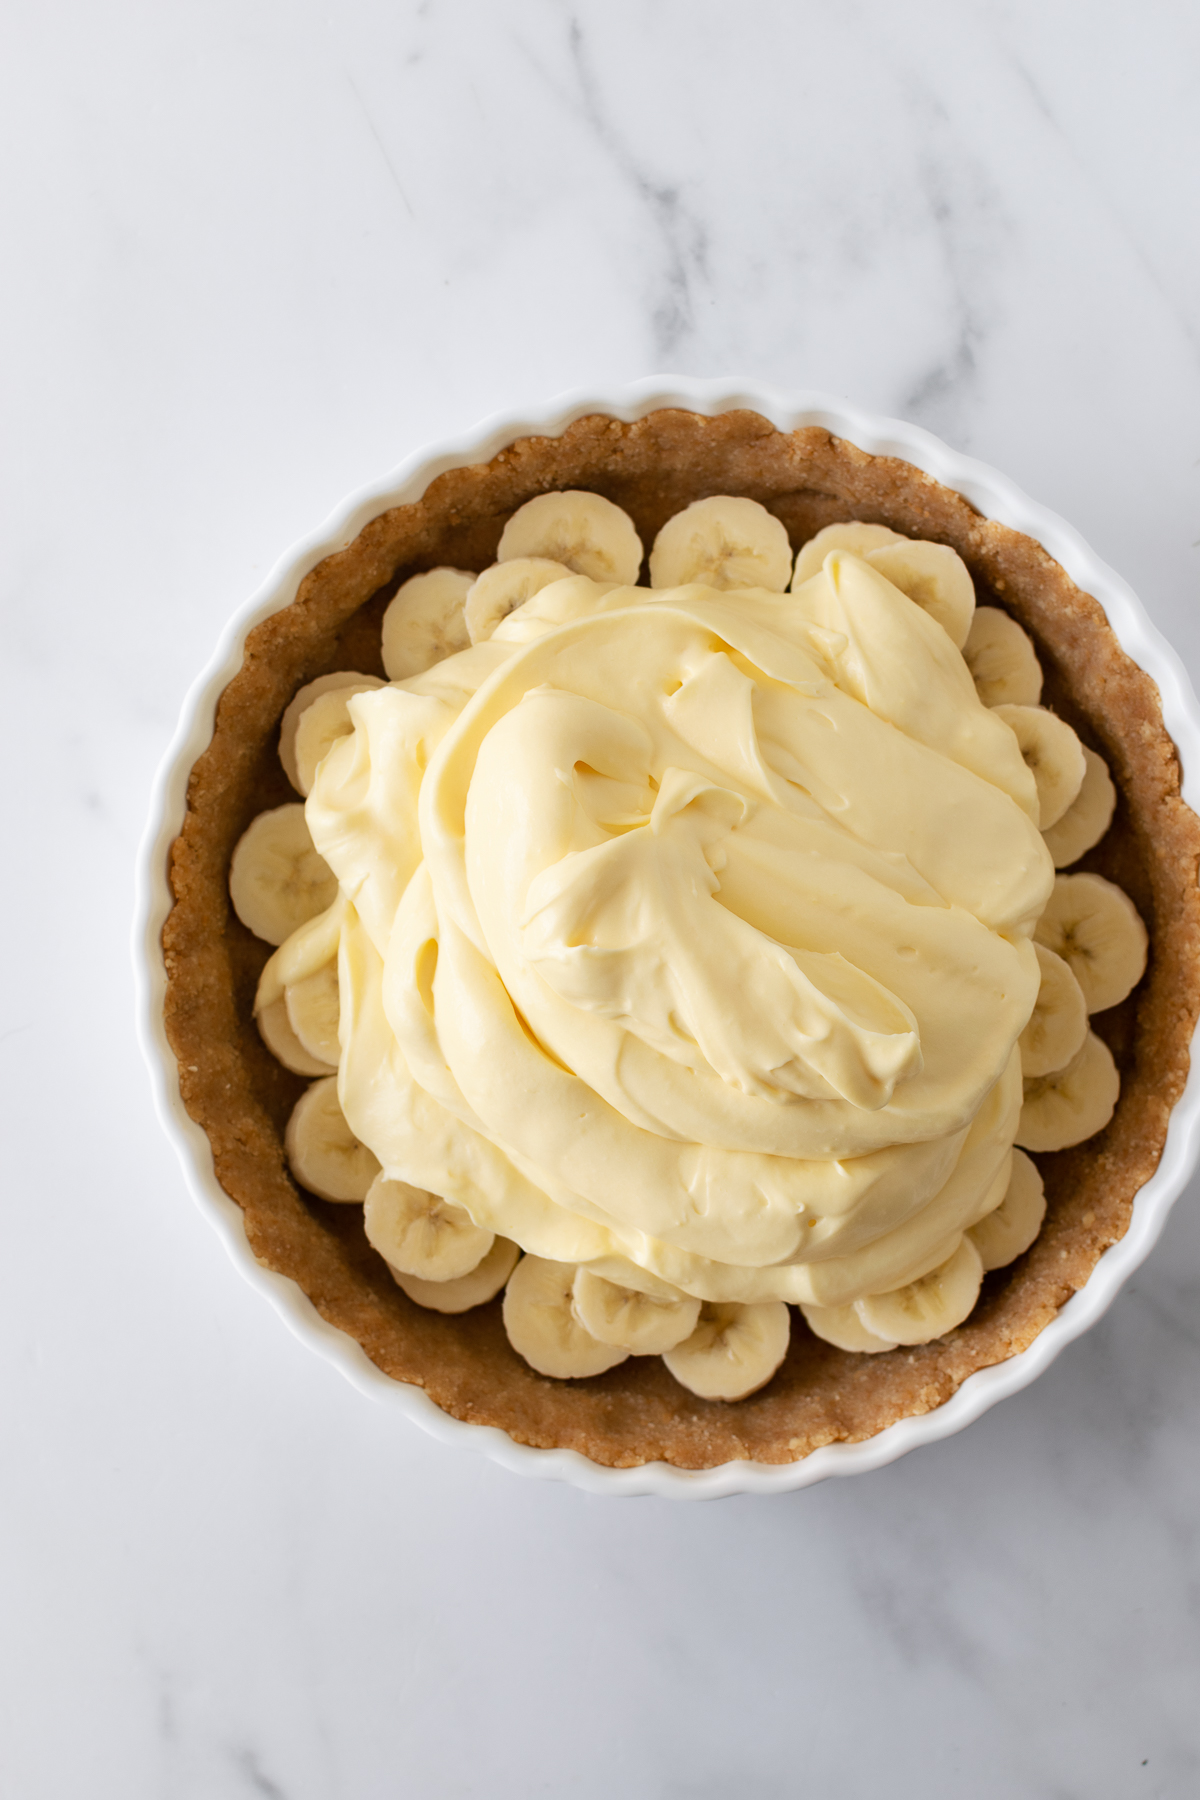 Get ready to fall in love with this no-bake banana pudding pie recipe. It starts with a buttery Nilla Wafer cookie crust, a layer of fresh banana slices and creamy vanilla pudding, and finished with homemade whipped cream. After the first bite you'll immediately know why it's loved by many!